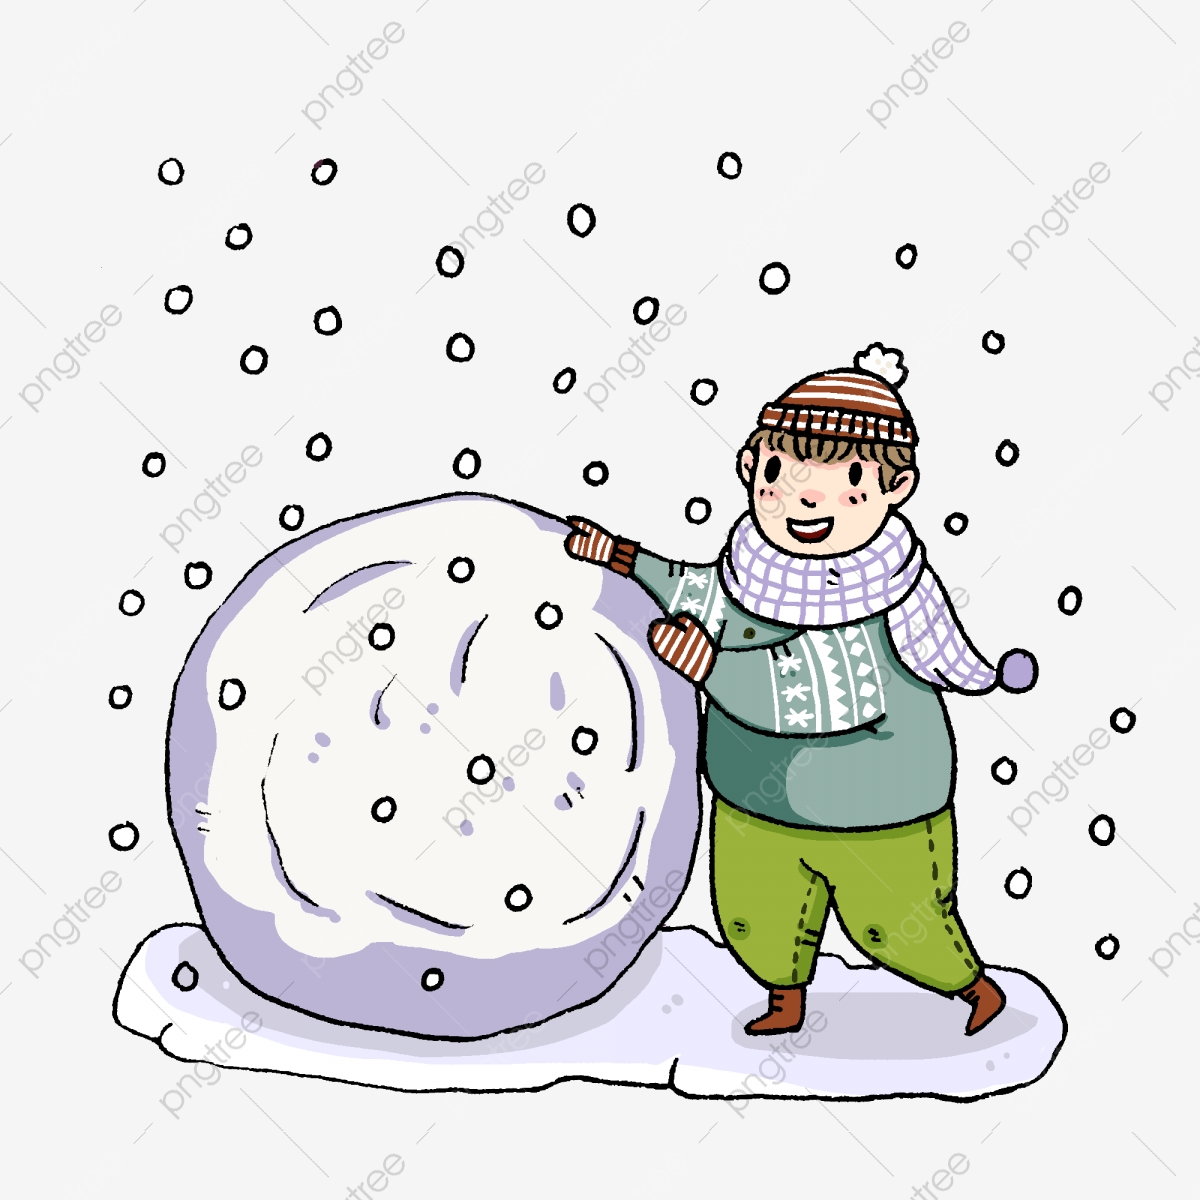 Snowball clipart big, Snowball big Transparent FREE for download on